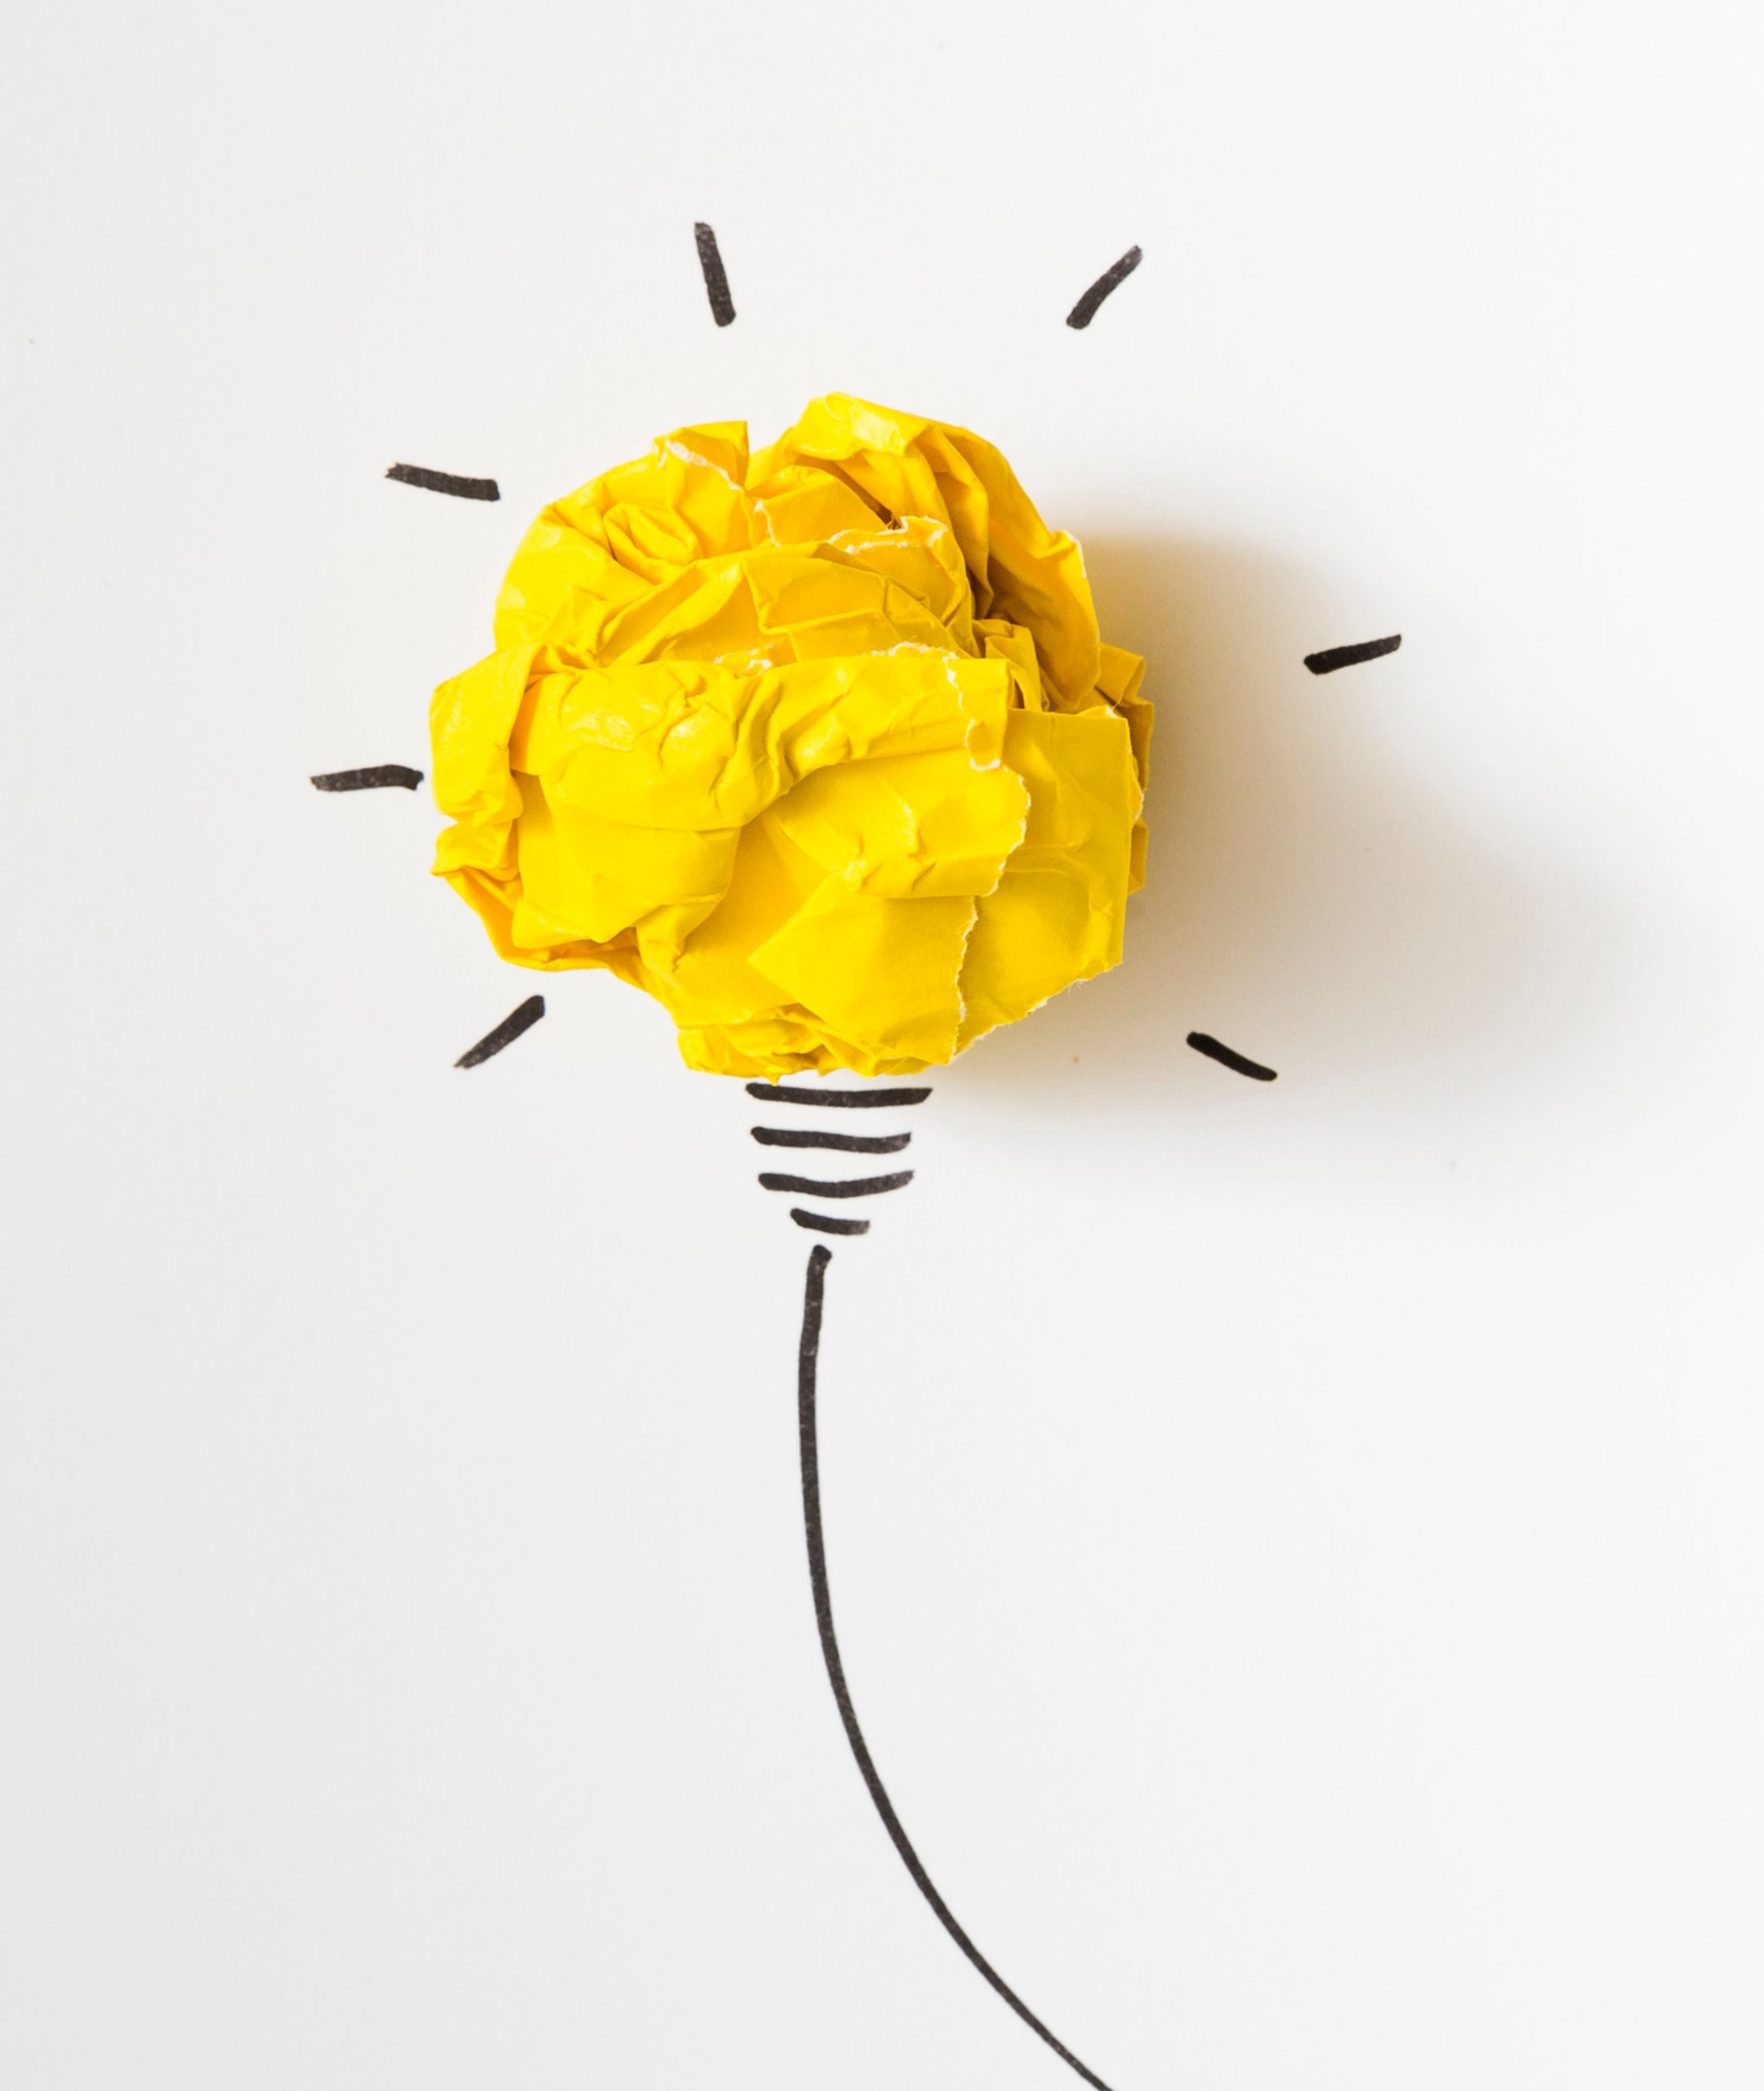 Image shows illuminated lightbulb with crumpled yellow paper used in the bulb's place and the rest drawn in black on a white background.